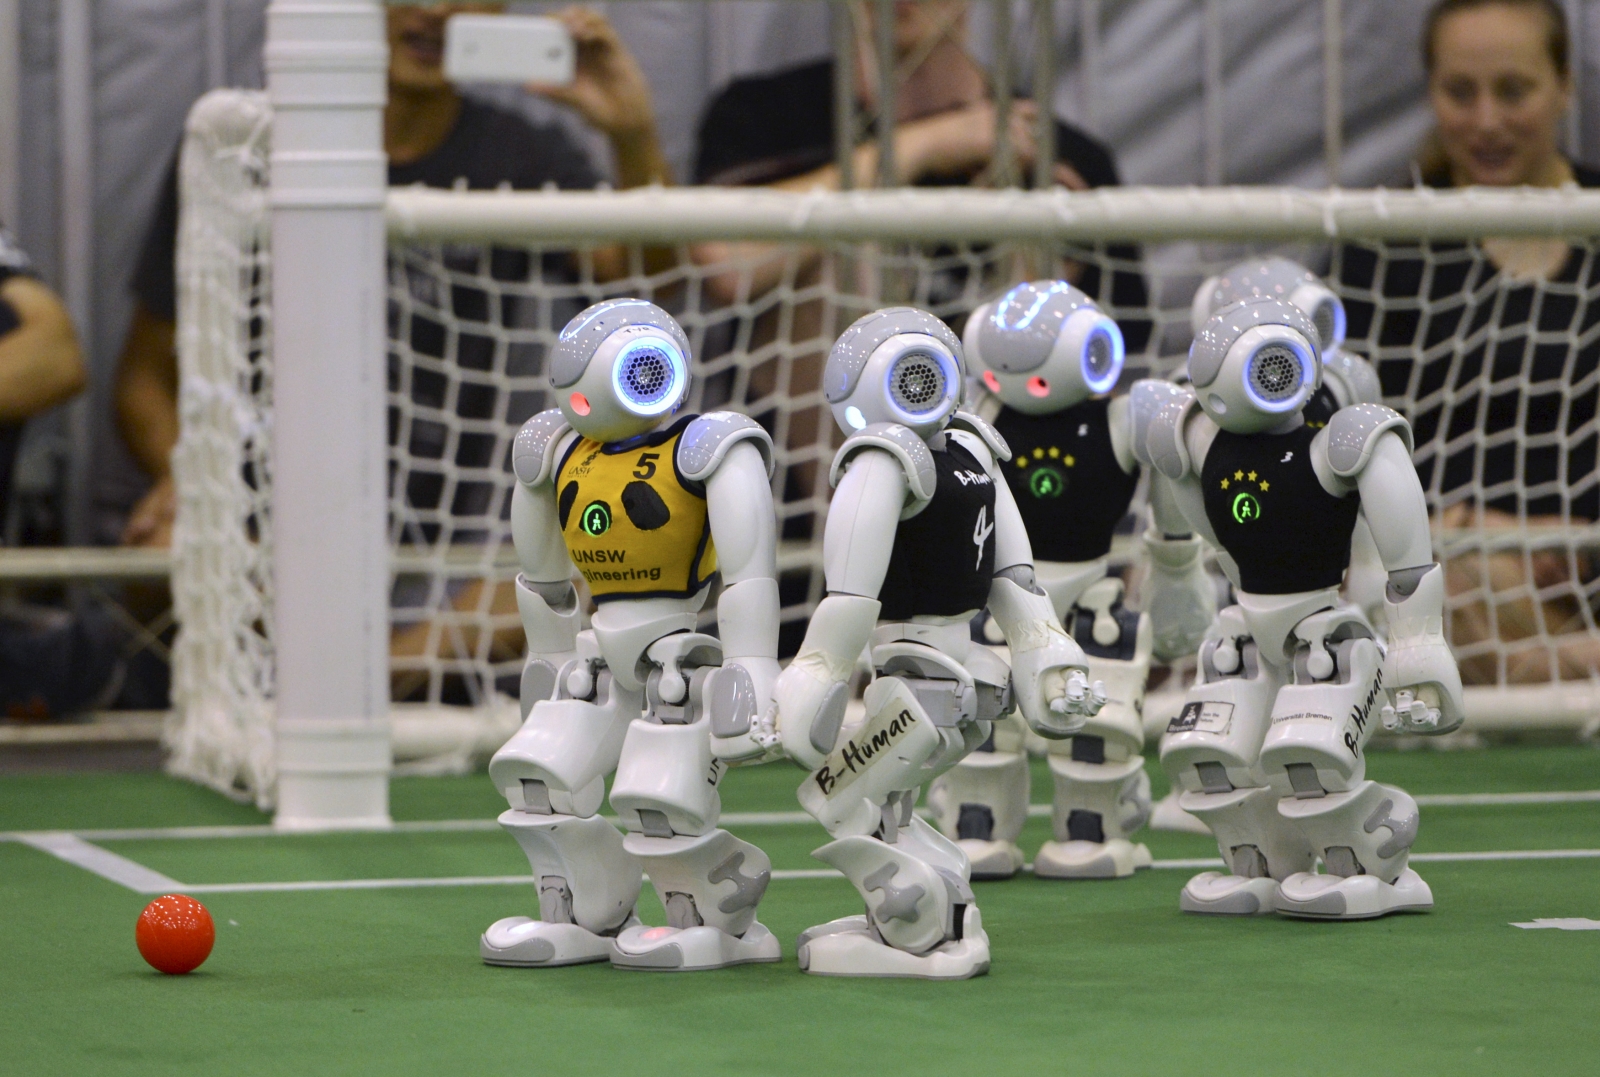 RoboCup 2015 Australian team crowned robot football world champions at